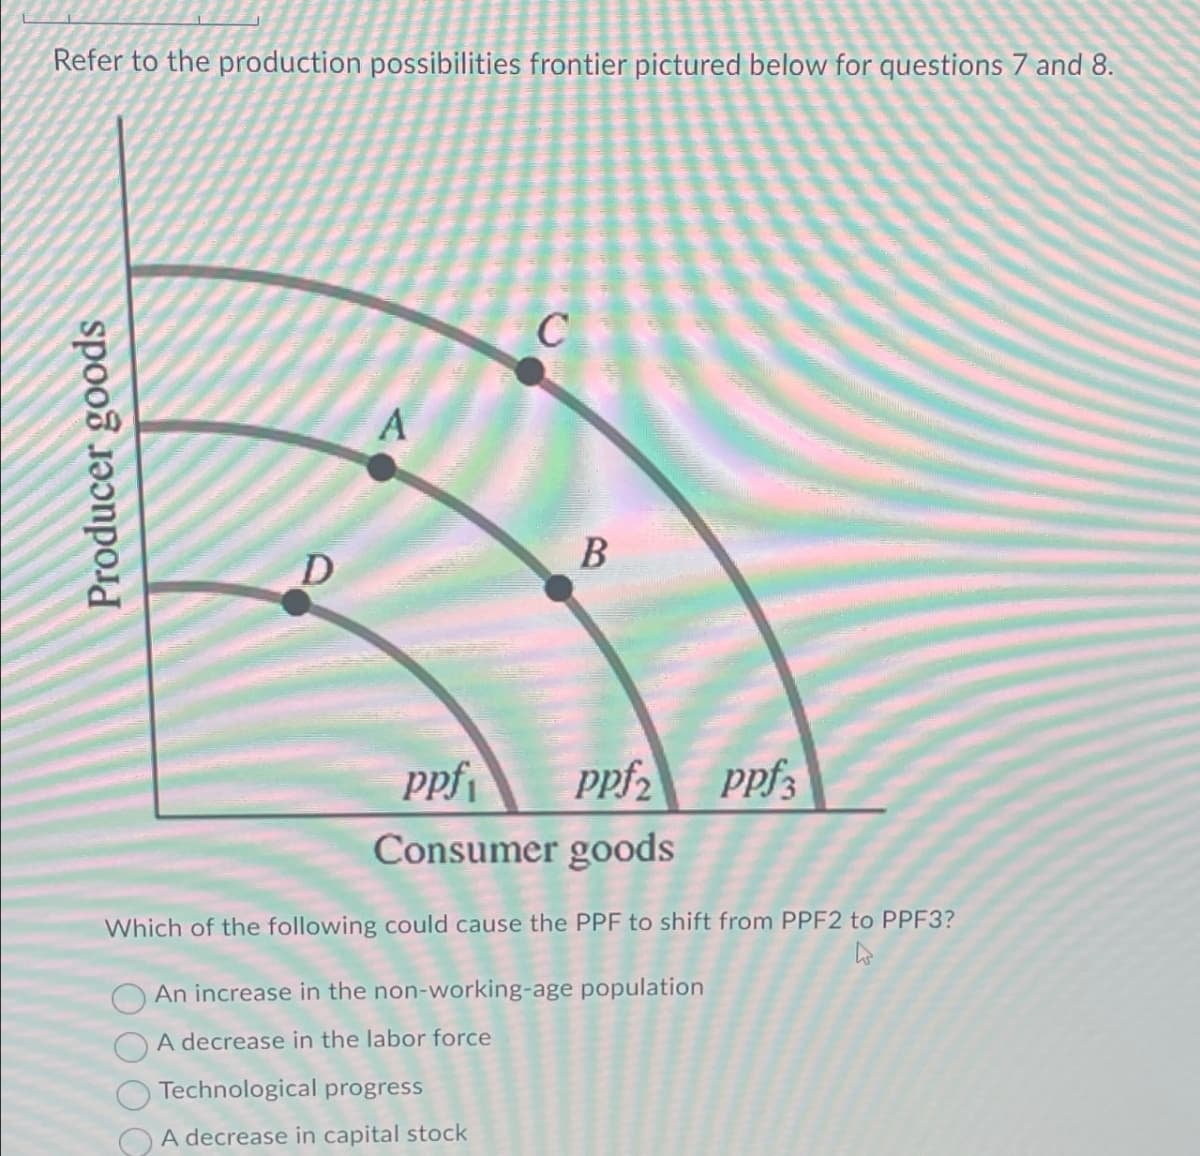 Refer to the production possibilities frontier pictured below for questions 7 and 8.
Producer goods
A
C
B
D
ppf ppf2
ppf3
Consumer goods
Which of the following could cause the PPF to shift from PPF2 to PPF3?
An increase in the non-working-age population
A decrease in the labor force
Technological progress
A decrease in capital stock